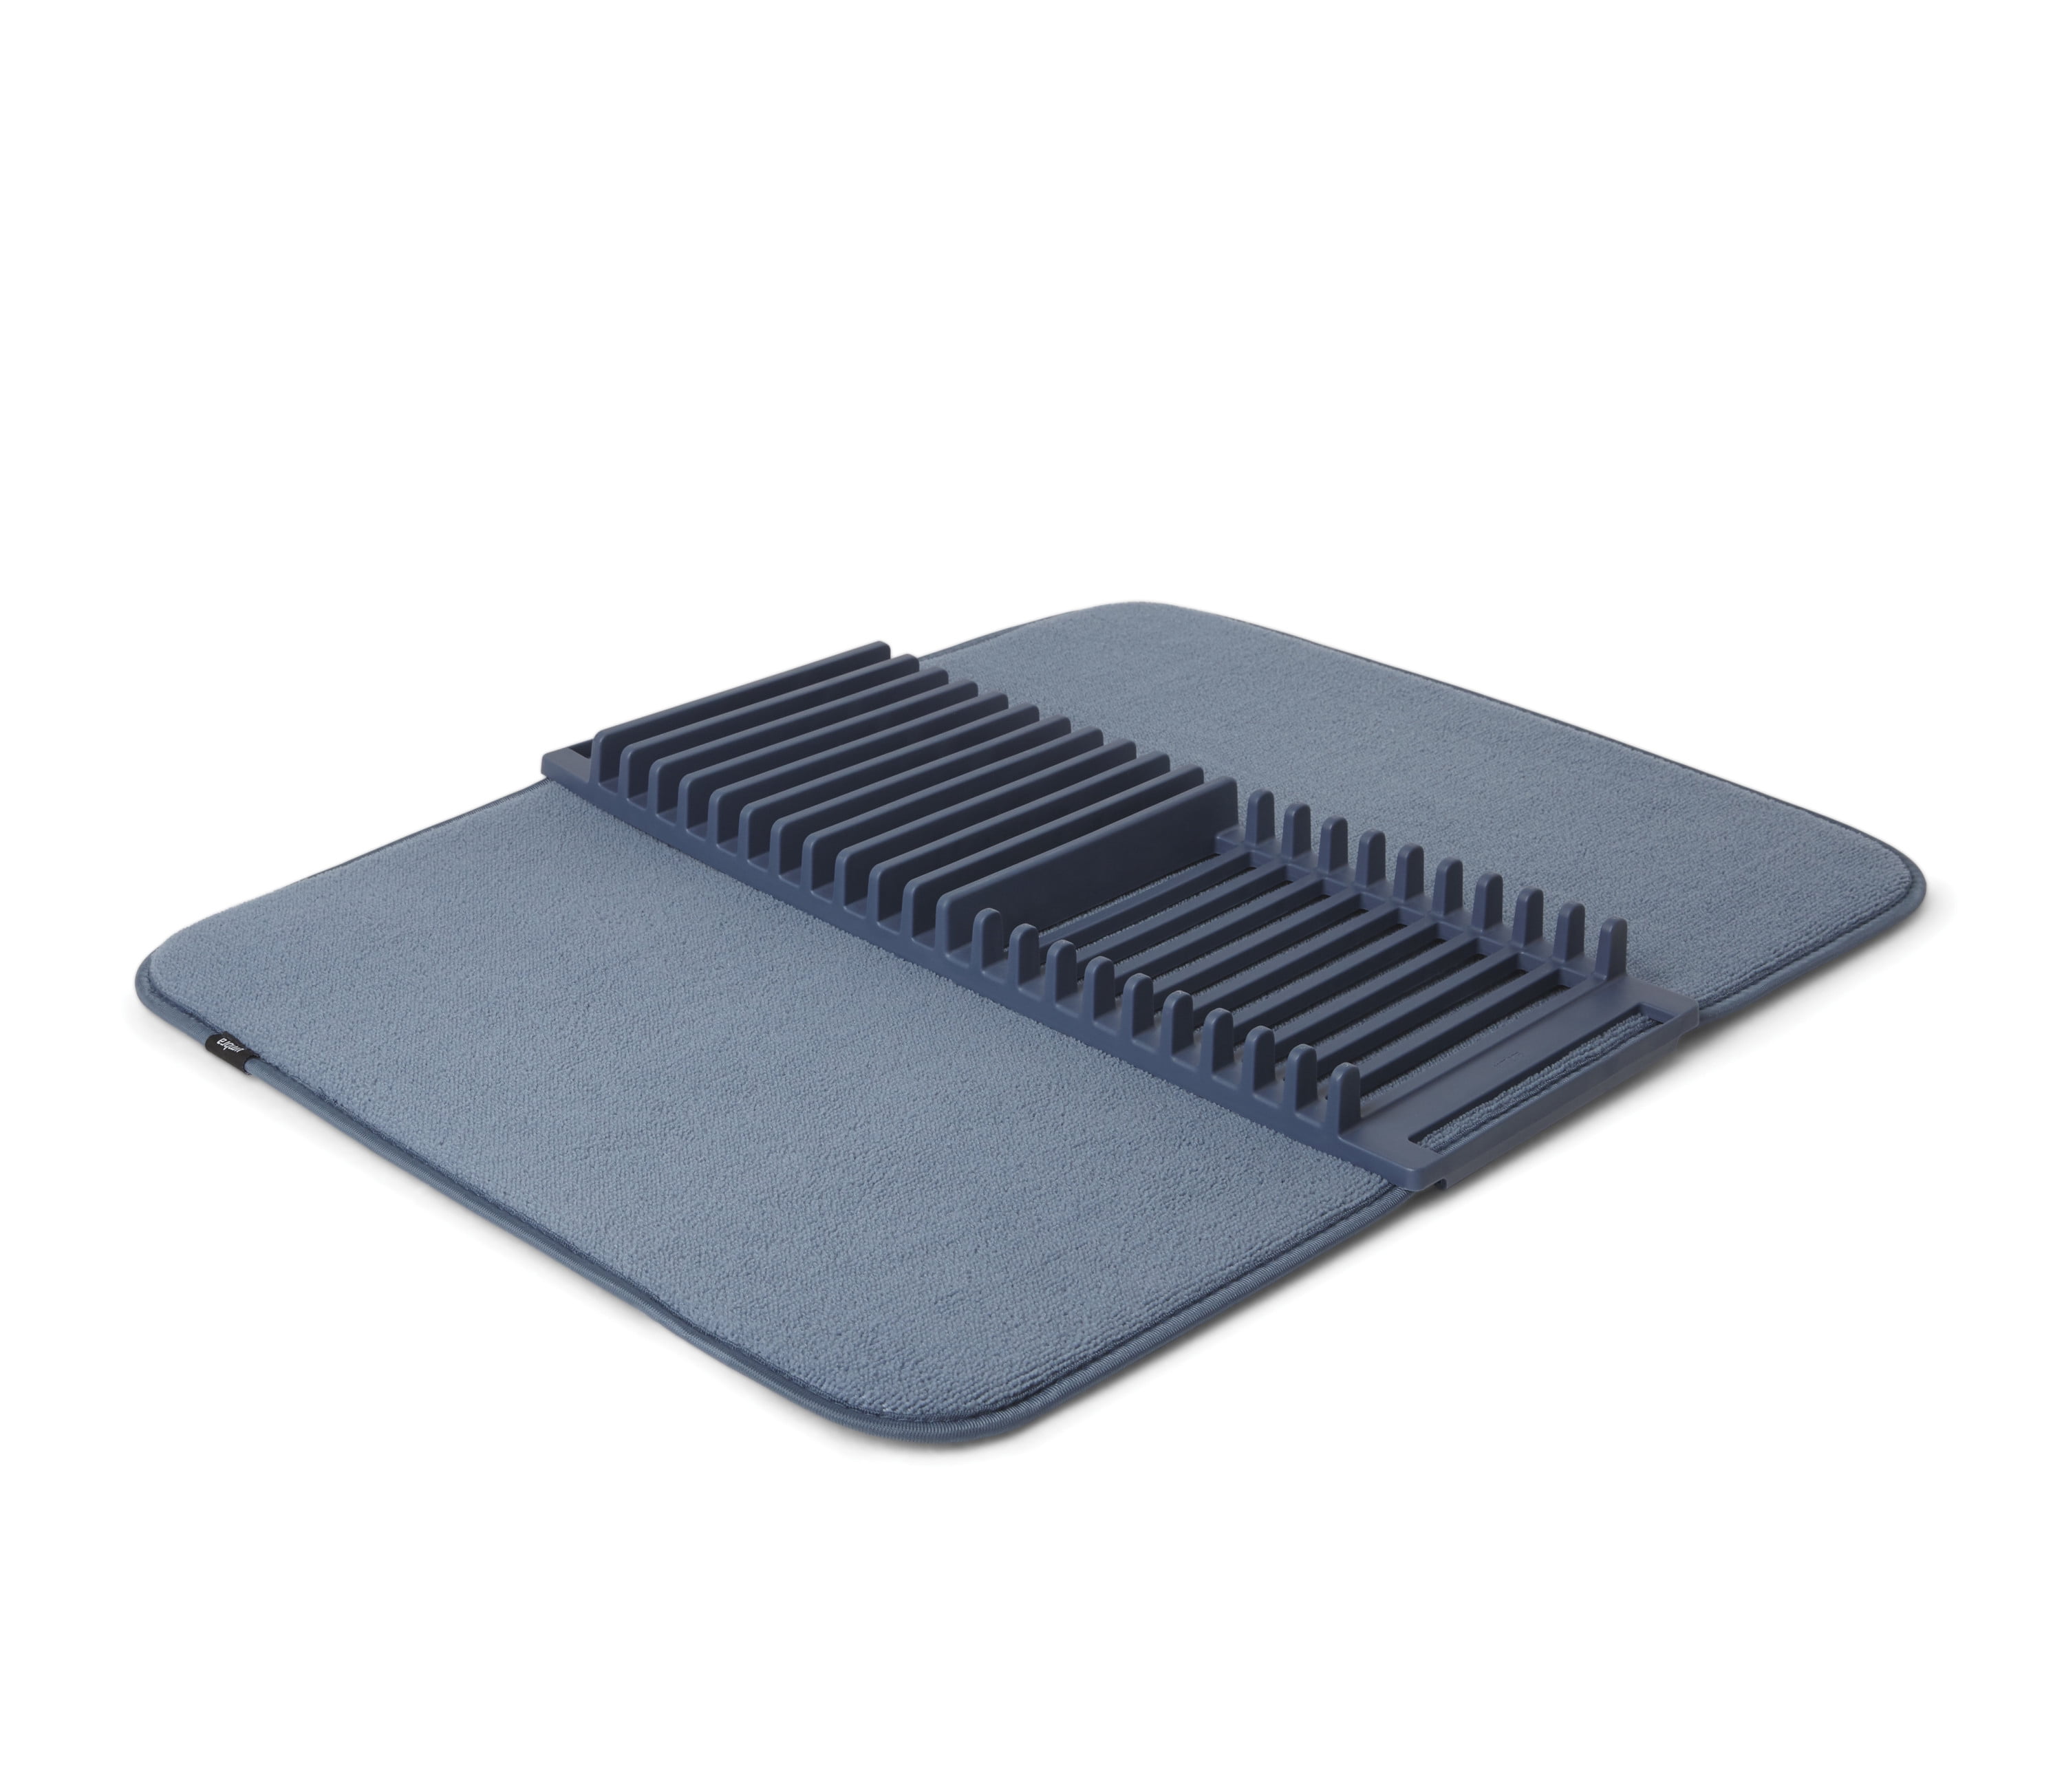 Microfiber Drying Mat Dishes Dry Dish Ware College Dorm Living